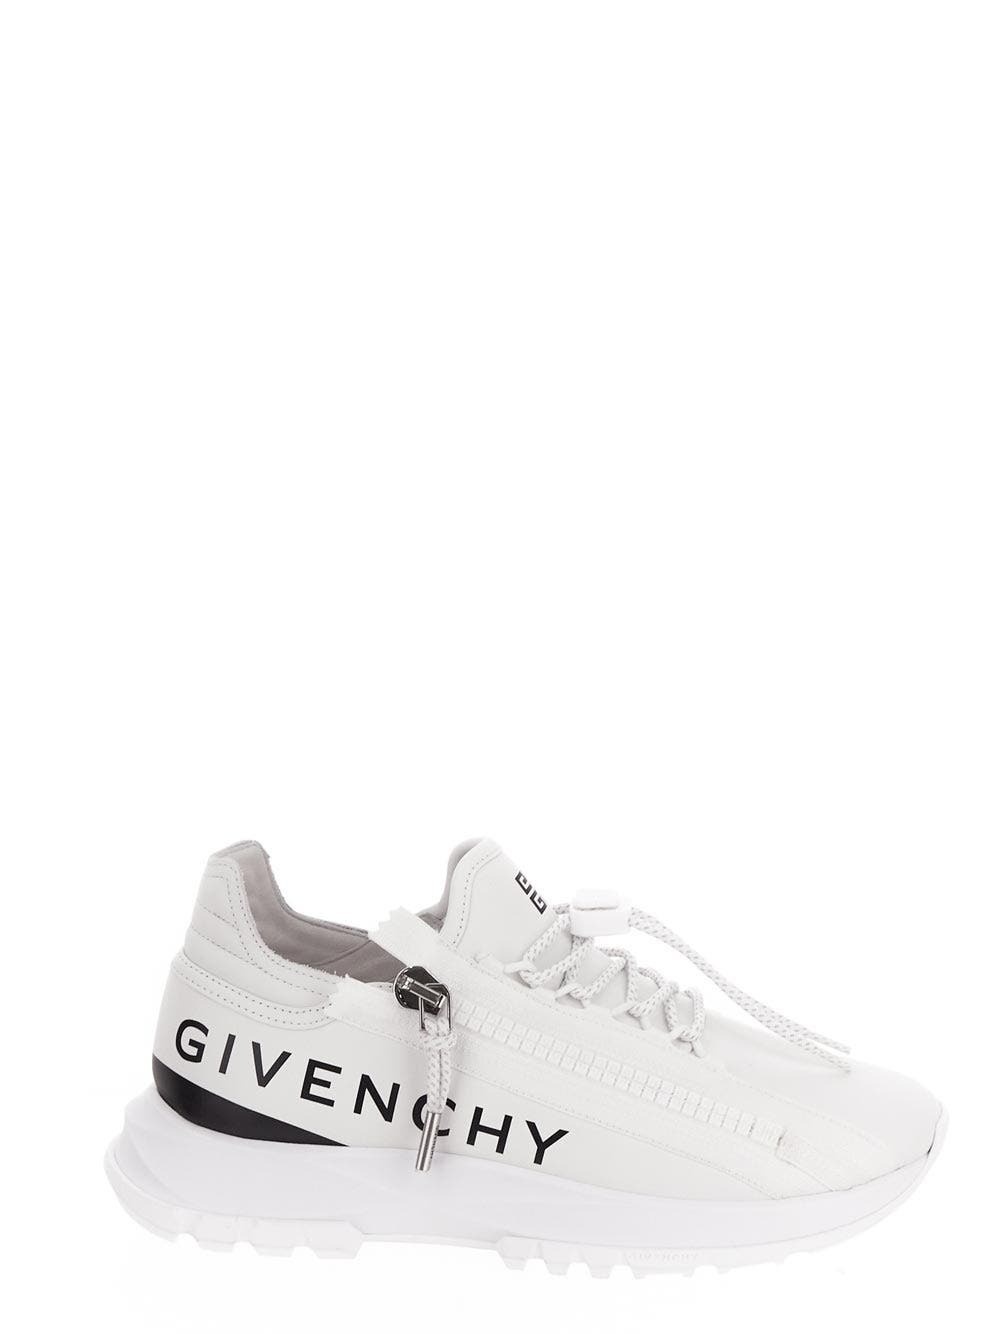 Photo: Givenchy Spectre Runner